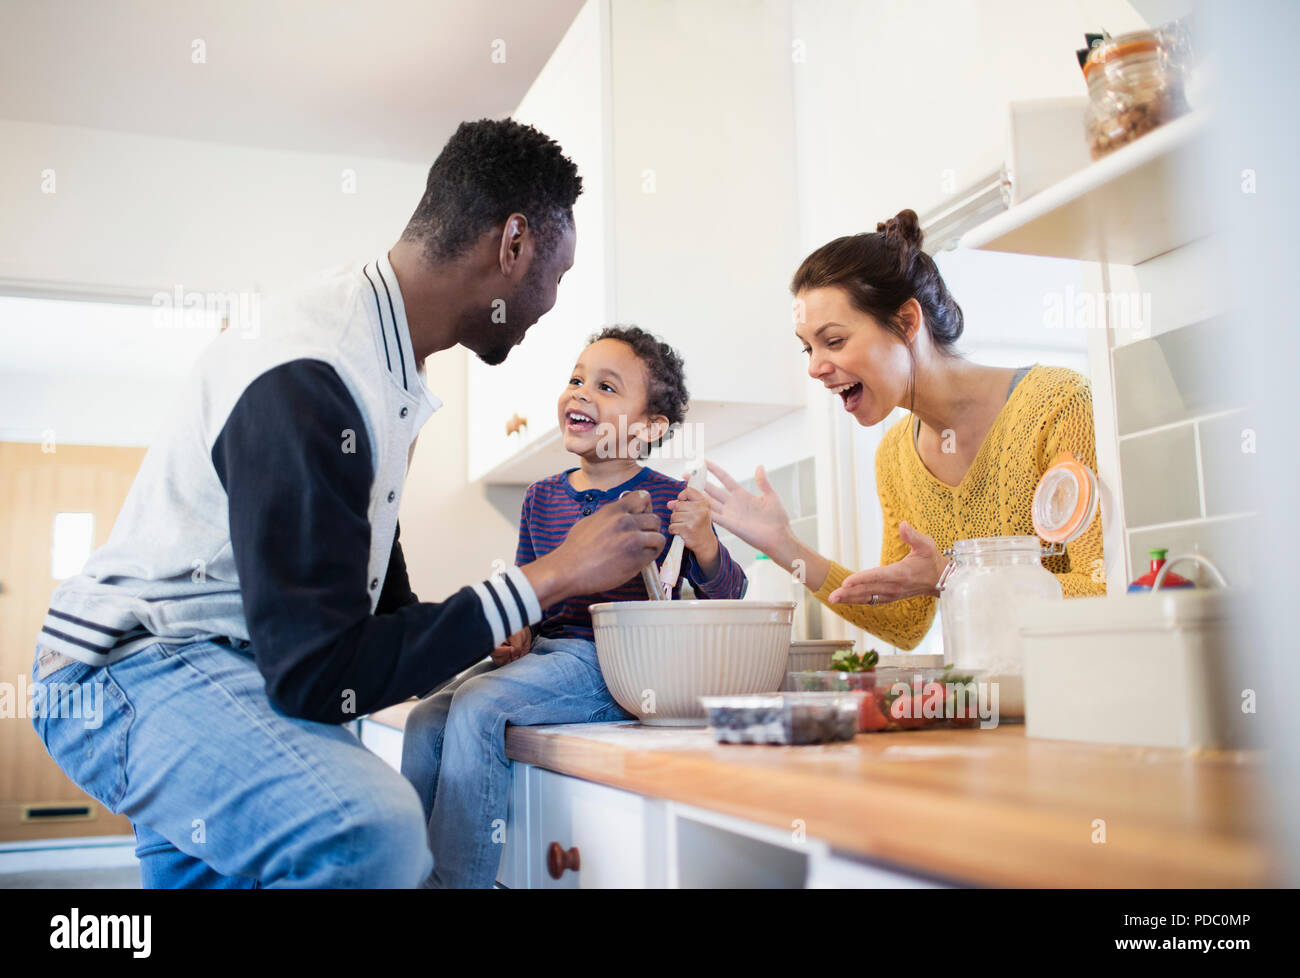 Parents and toddler son baking in kitchen Stock Photo